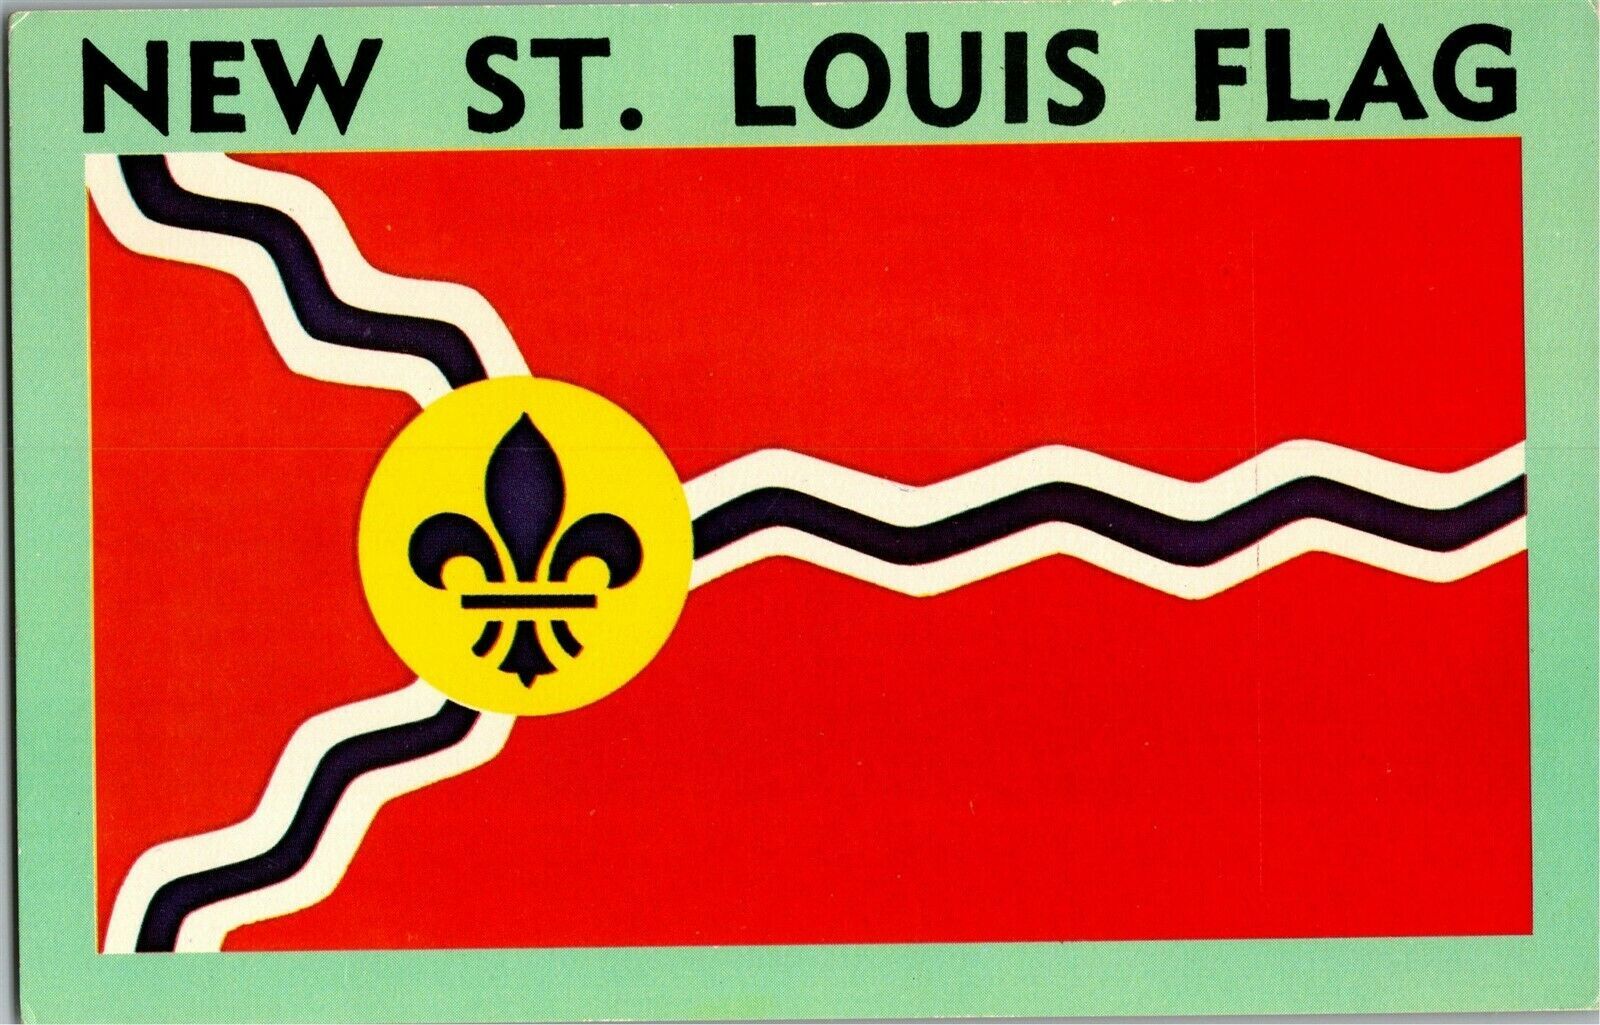 New St. Louis Flag by Theodore Sixer for Bicentennial Vintage